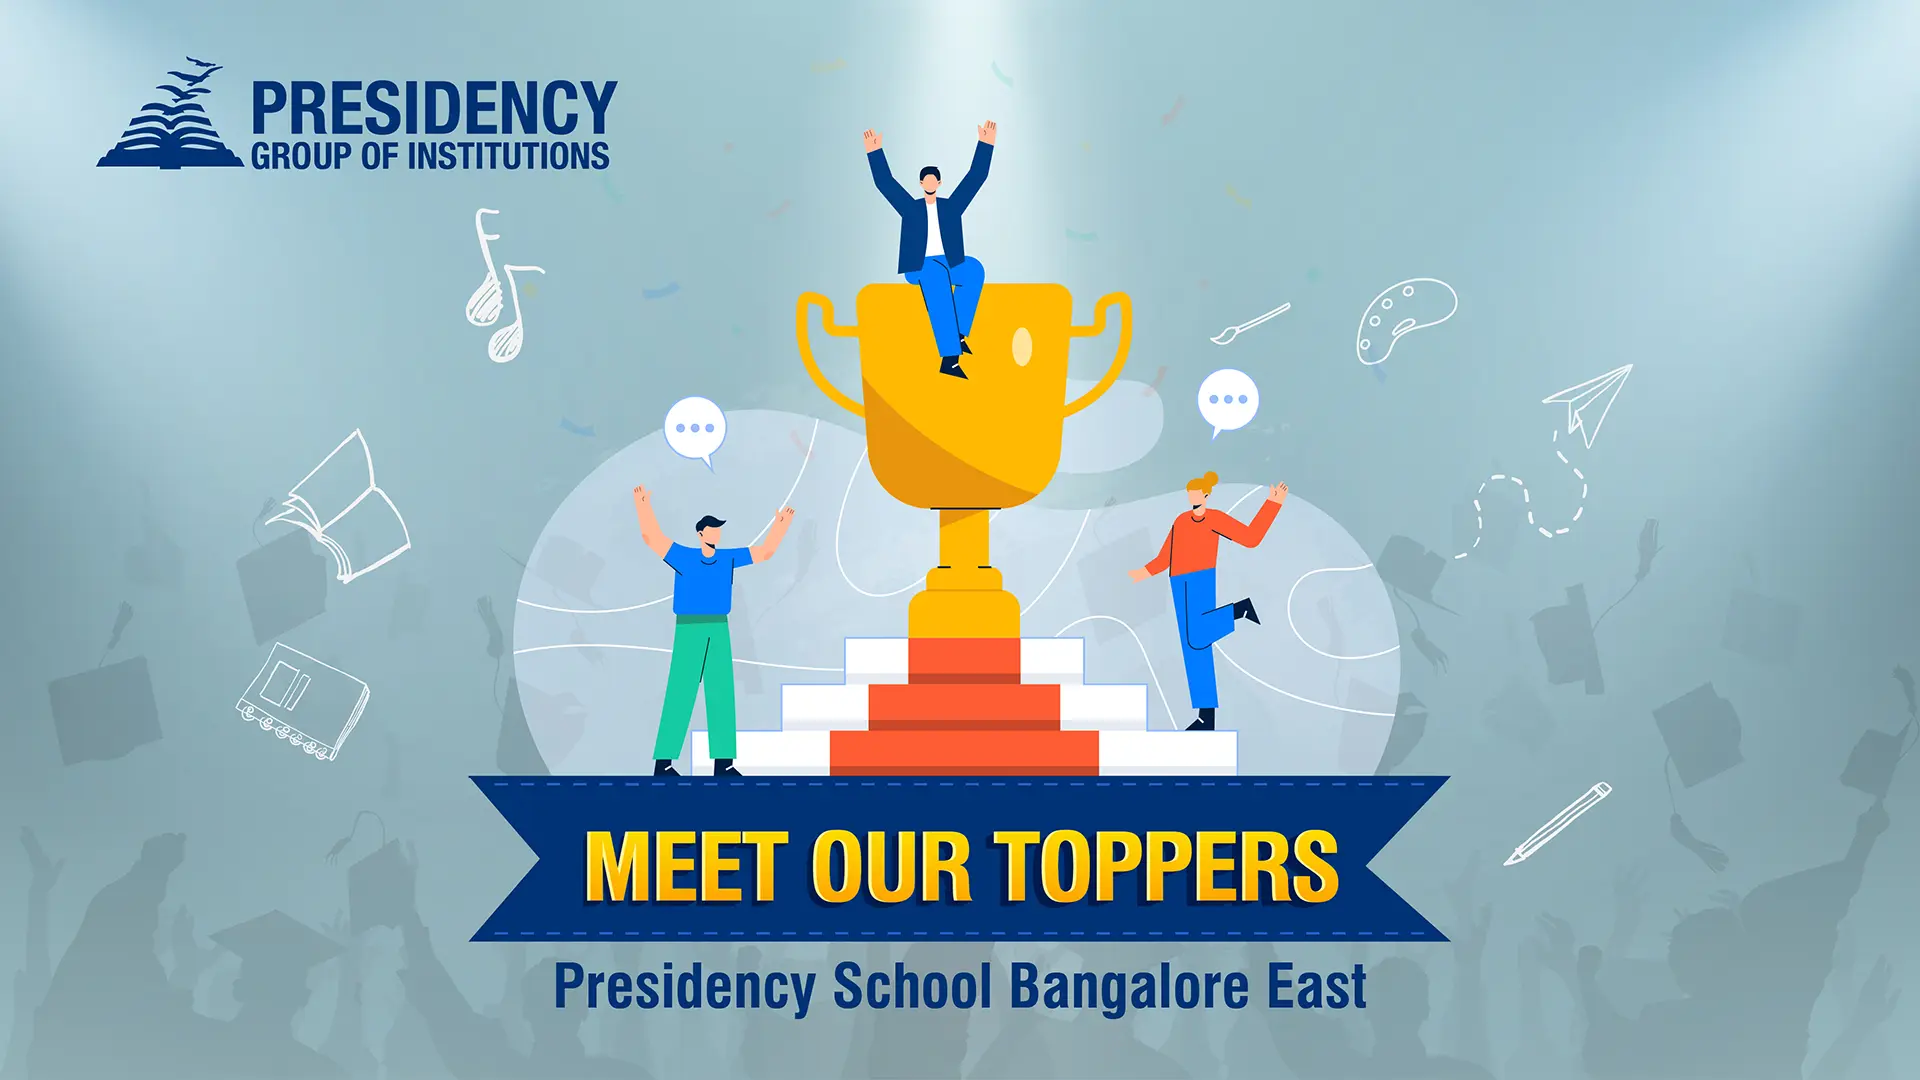 The school toppers of Presidency school Bangalore East